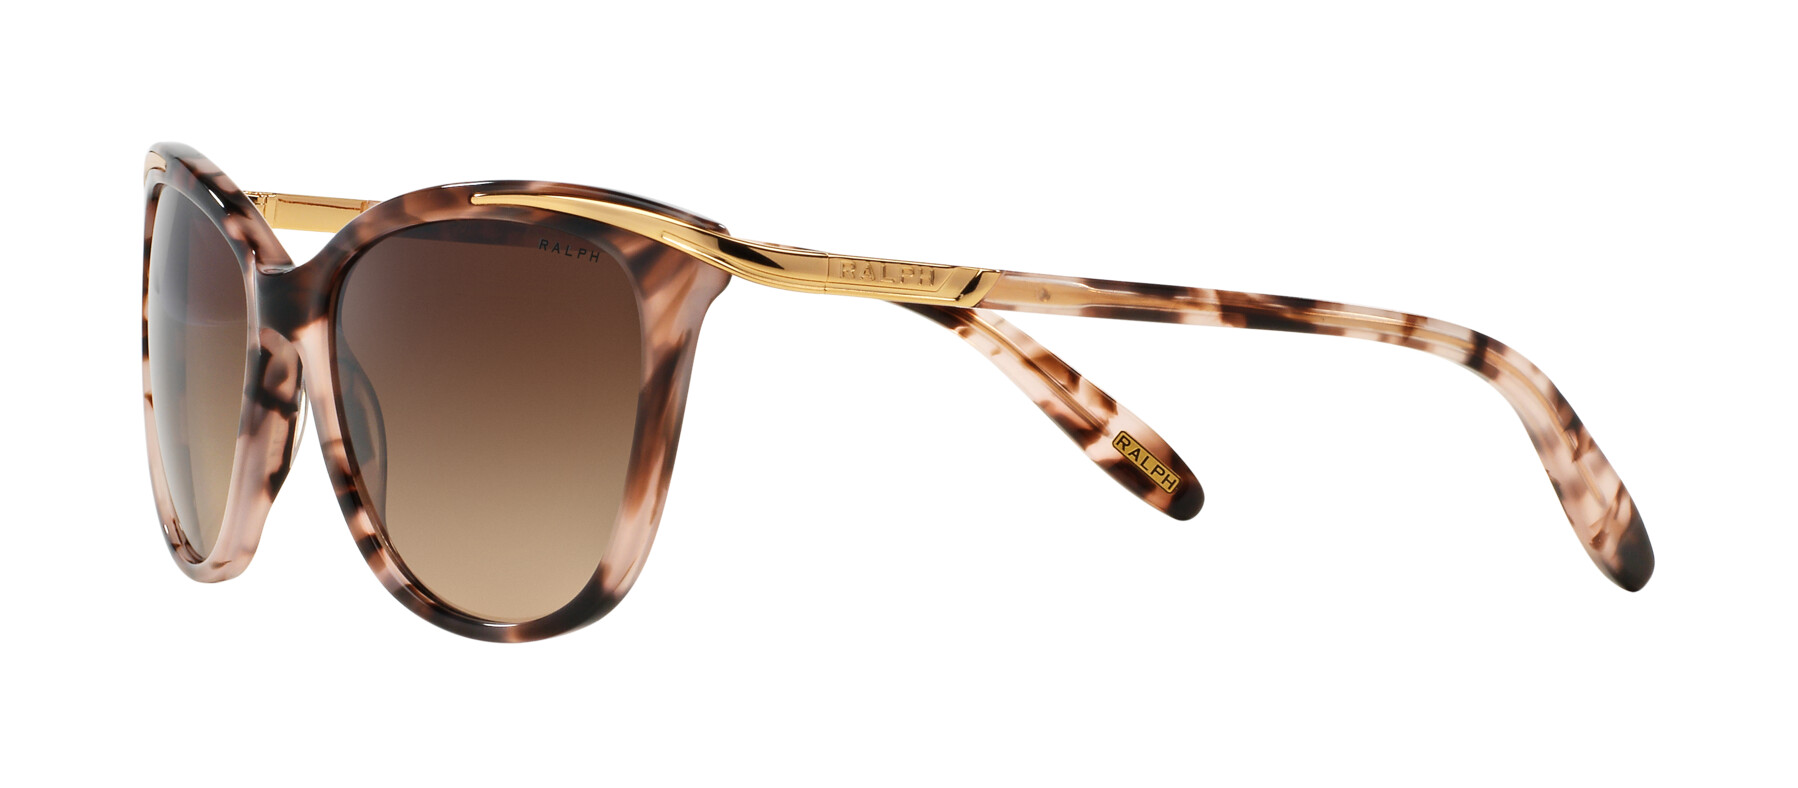 [products.image.angle_left02] Ralph Lauren 0RA5203 146313 Sonnenbrille